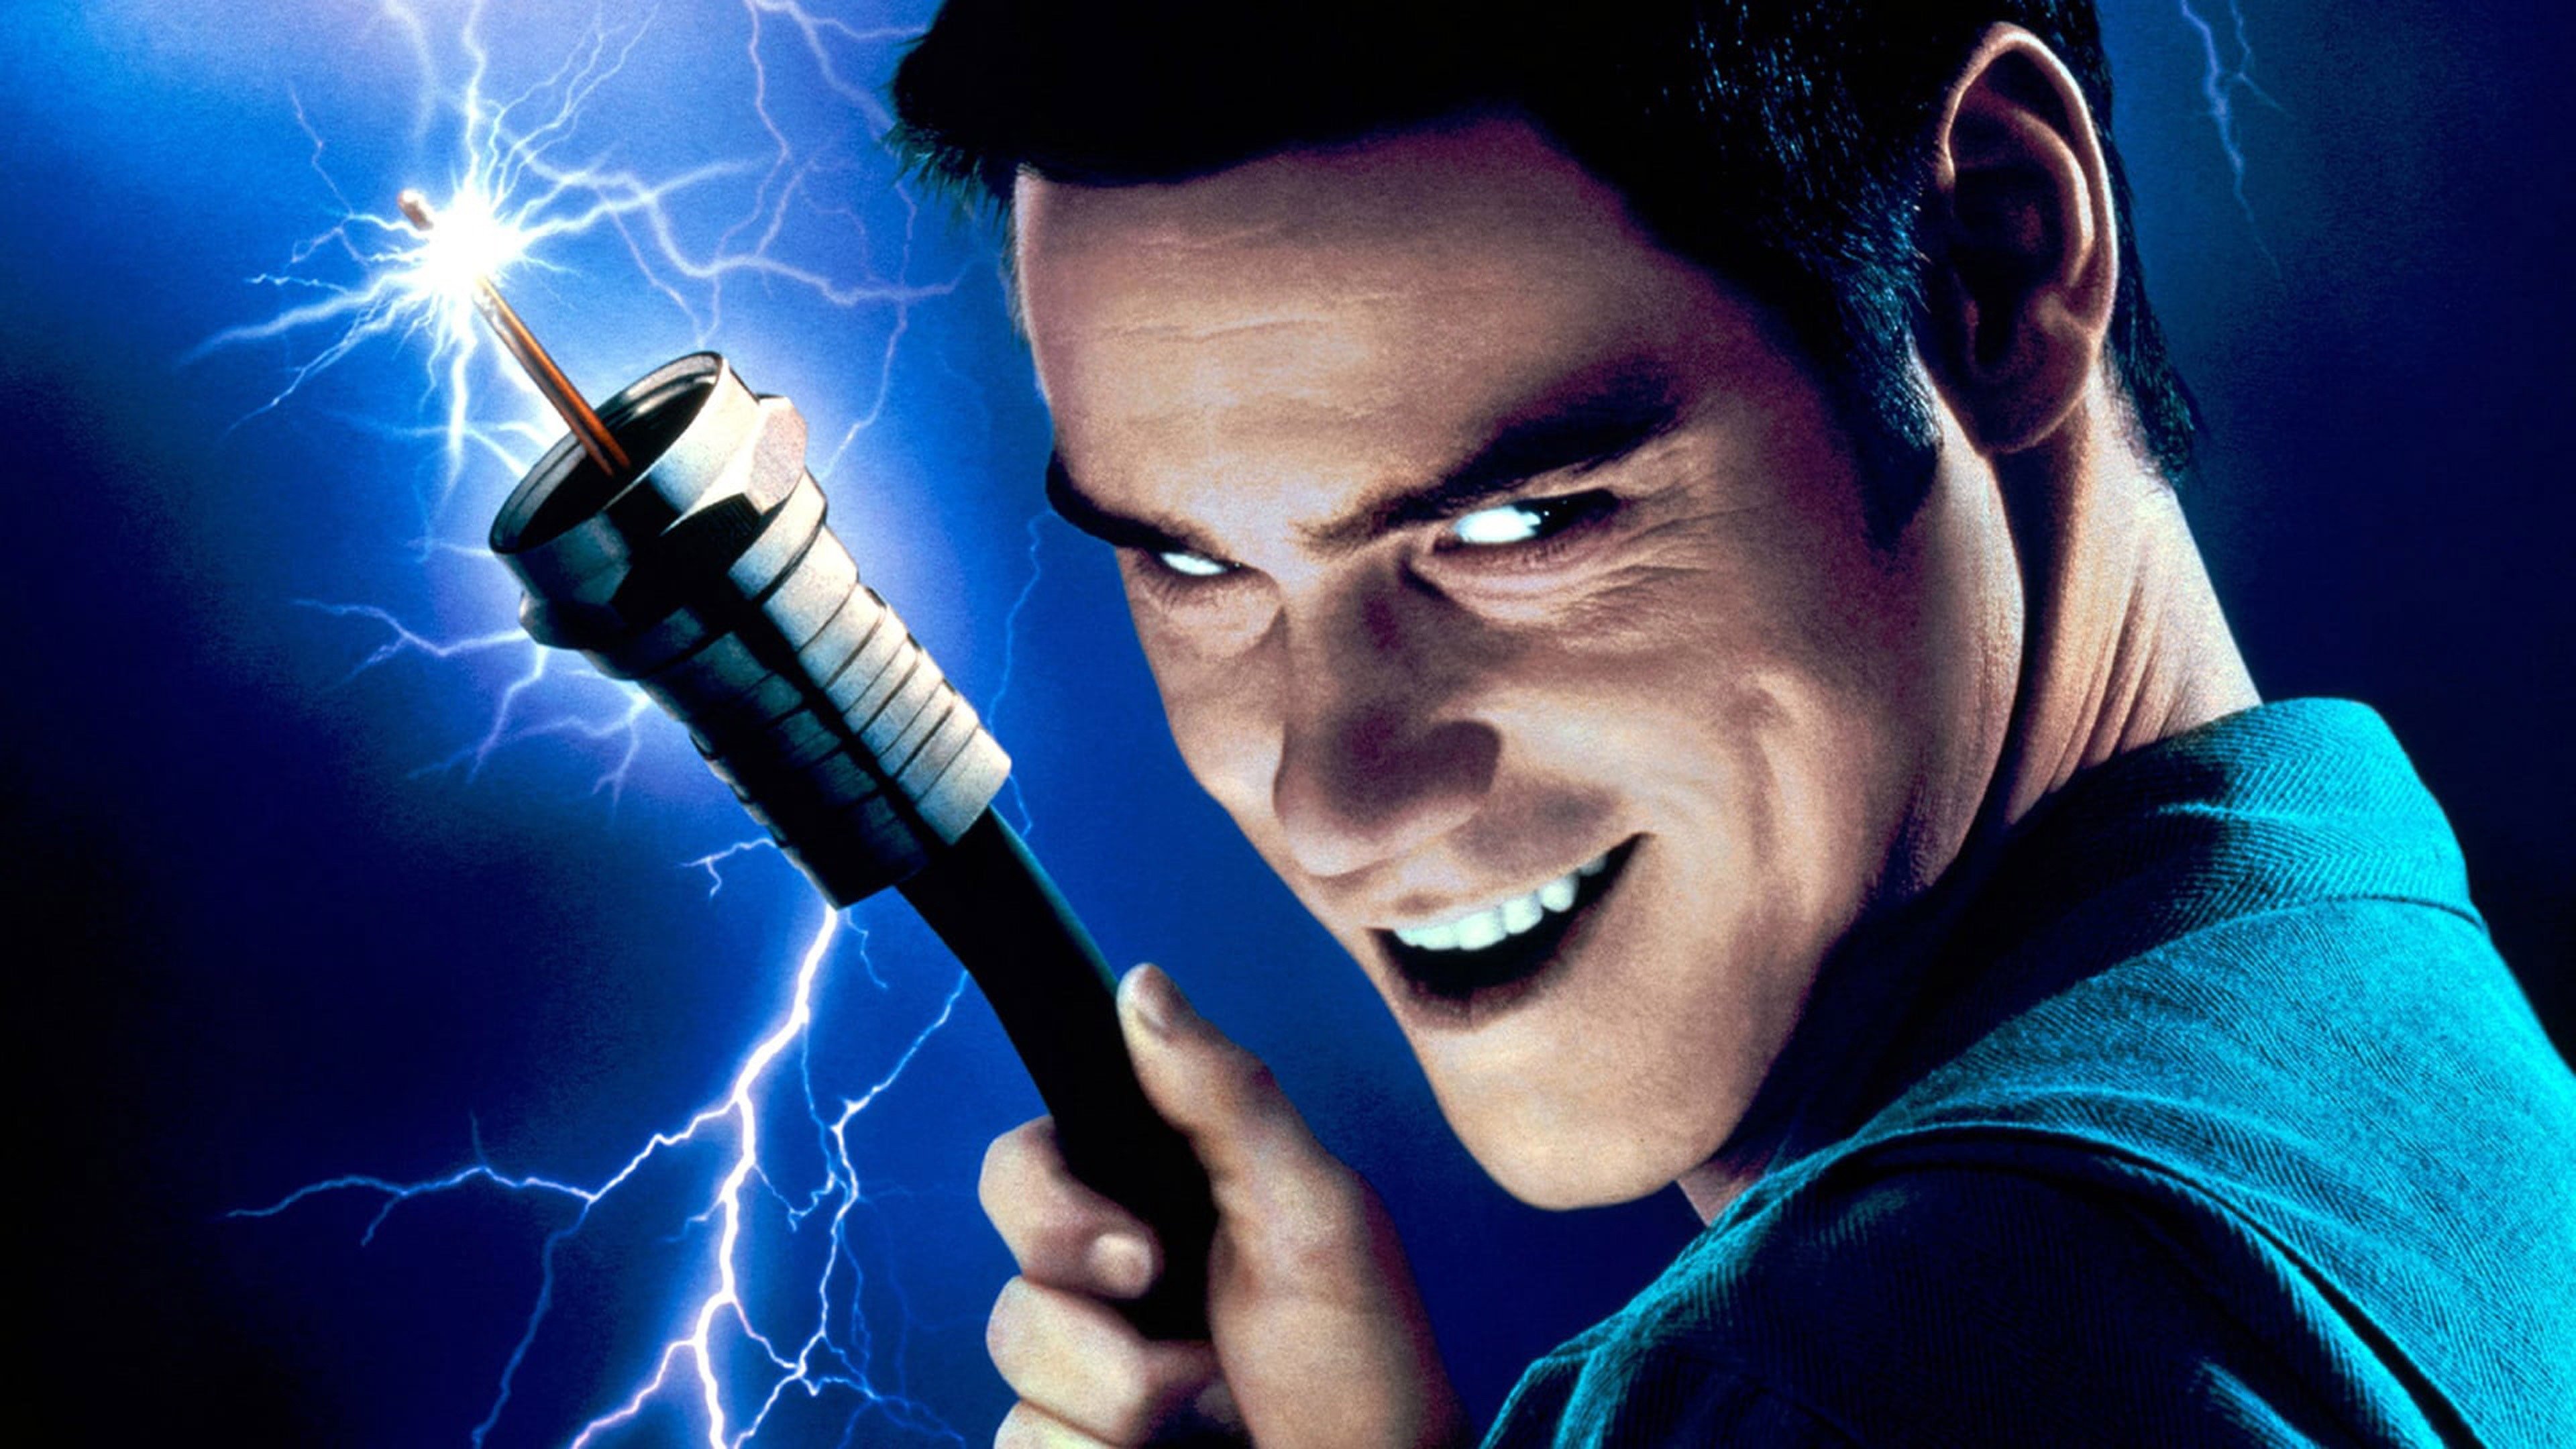 The Cable Guy Trailer 1 Trailers And Videos Rotten Tomatoes